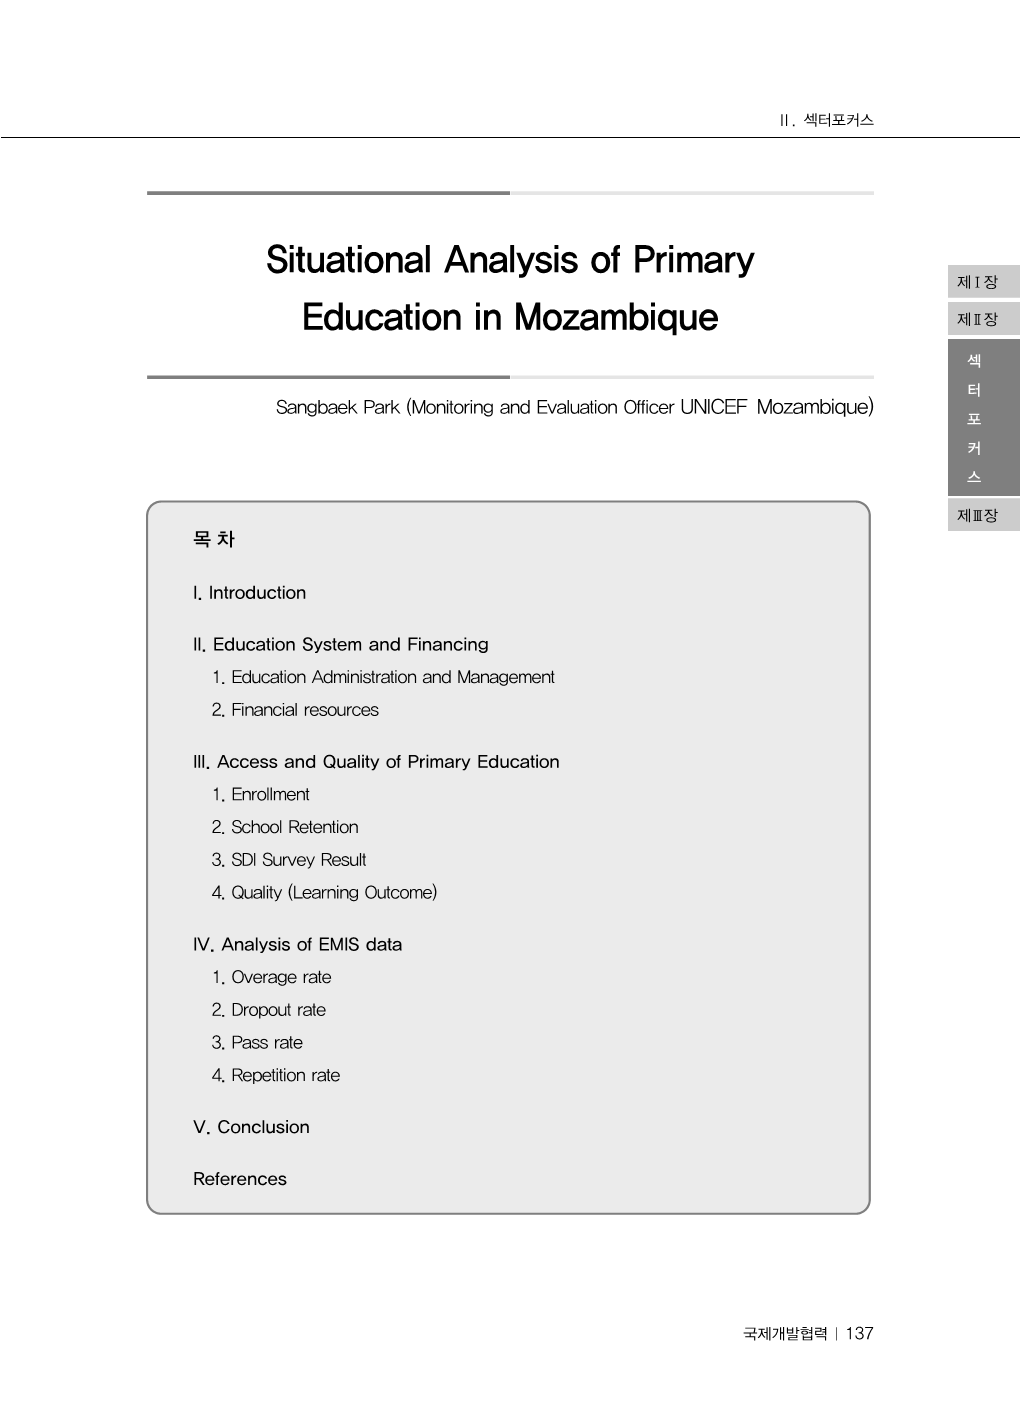 Situational Analysis of Primary Education in Mozambique